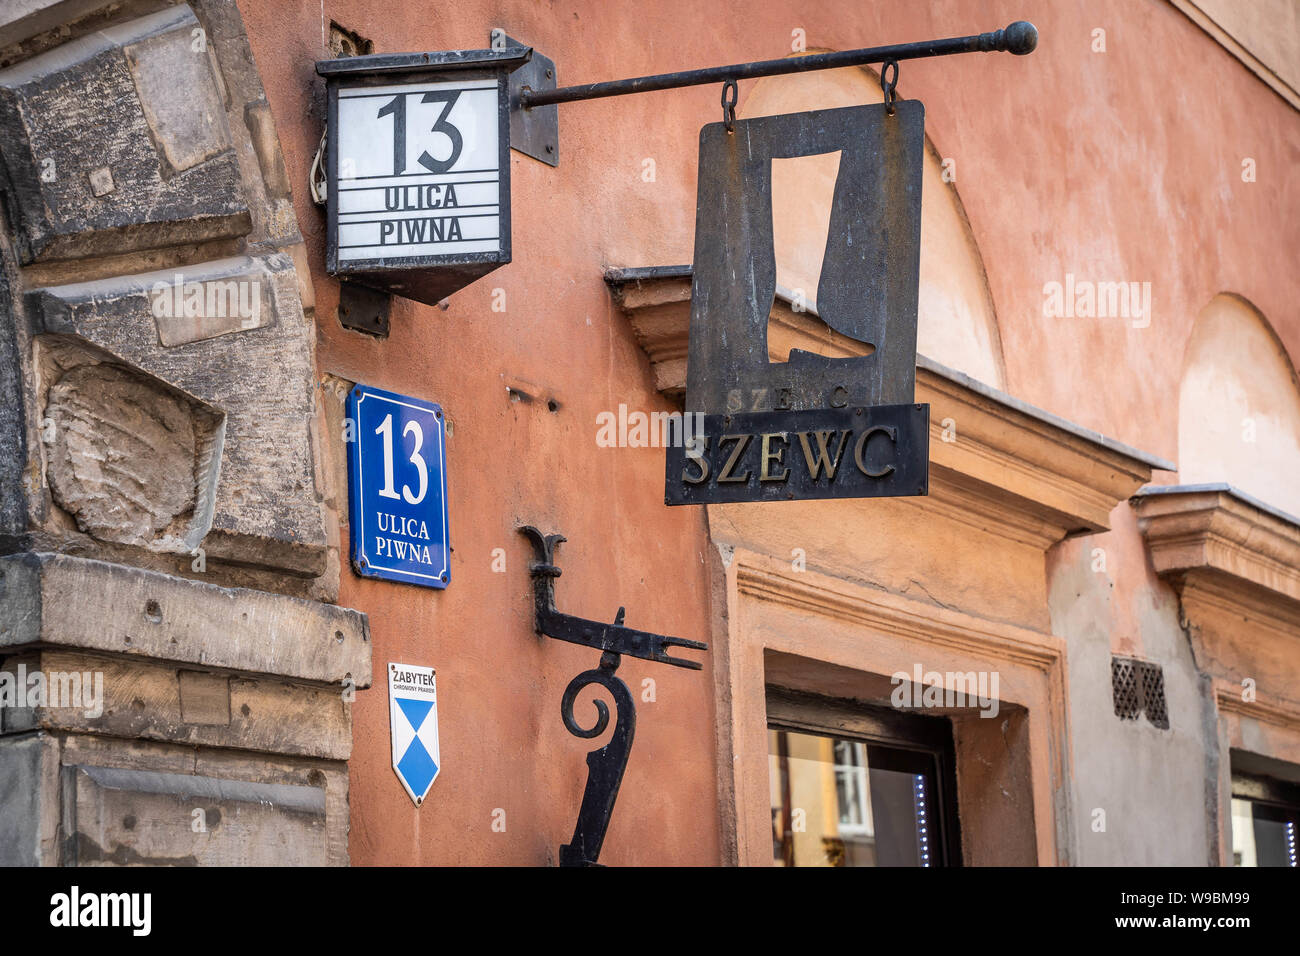 Warsaw, Poland - August 2019: Metal sign of a Boot repair shop in Warsaw Old Town (Ulica Piwna Street) Stock Photo